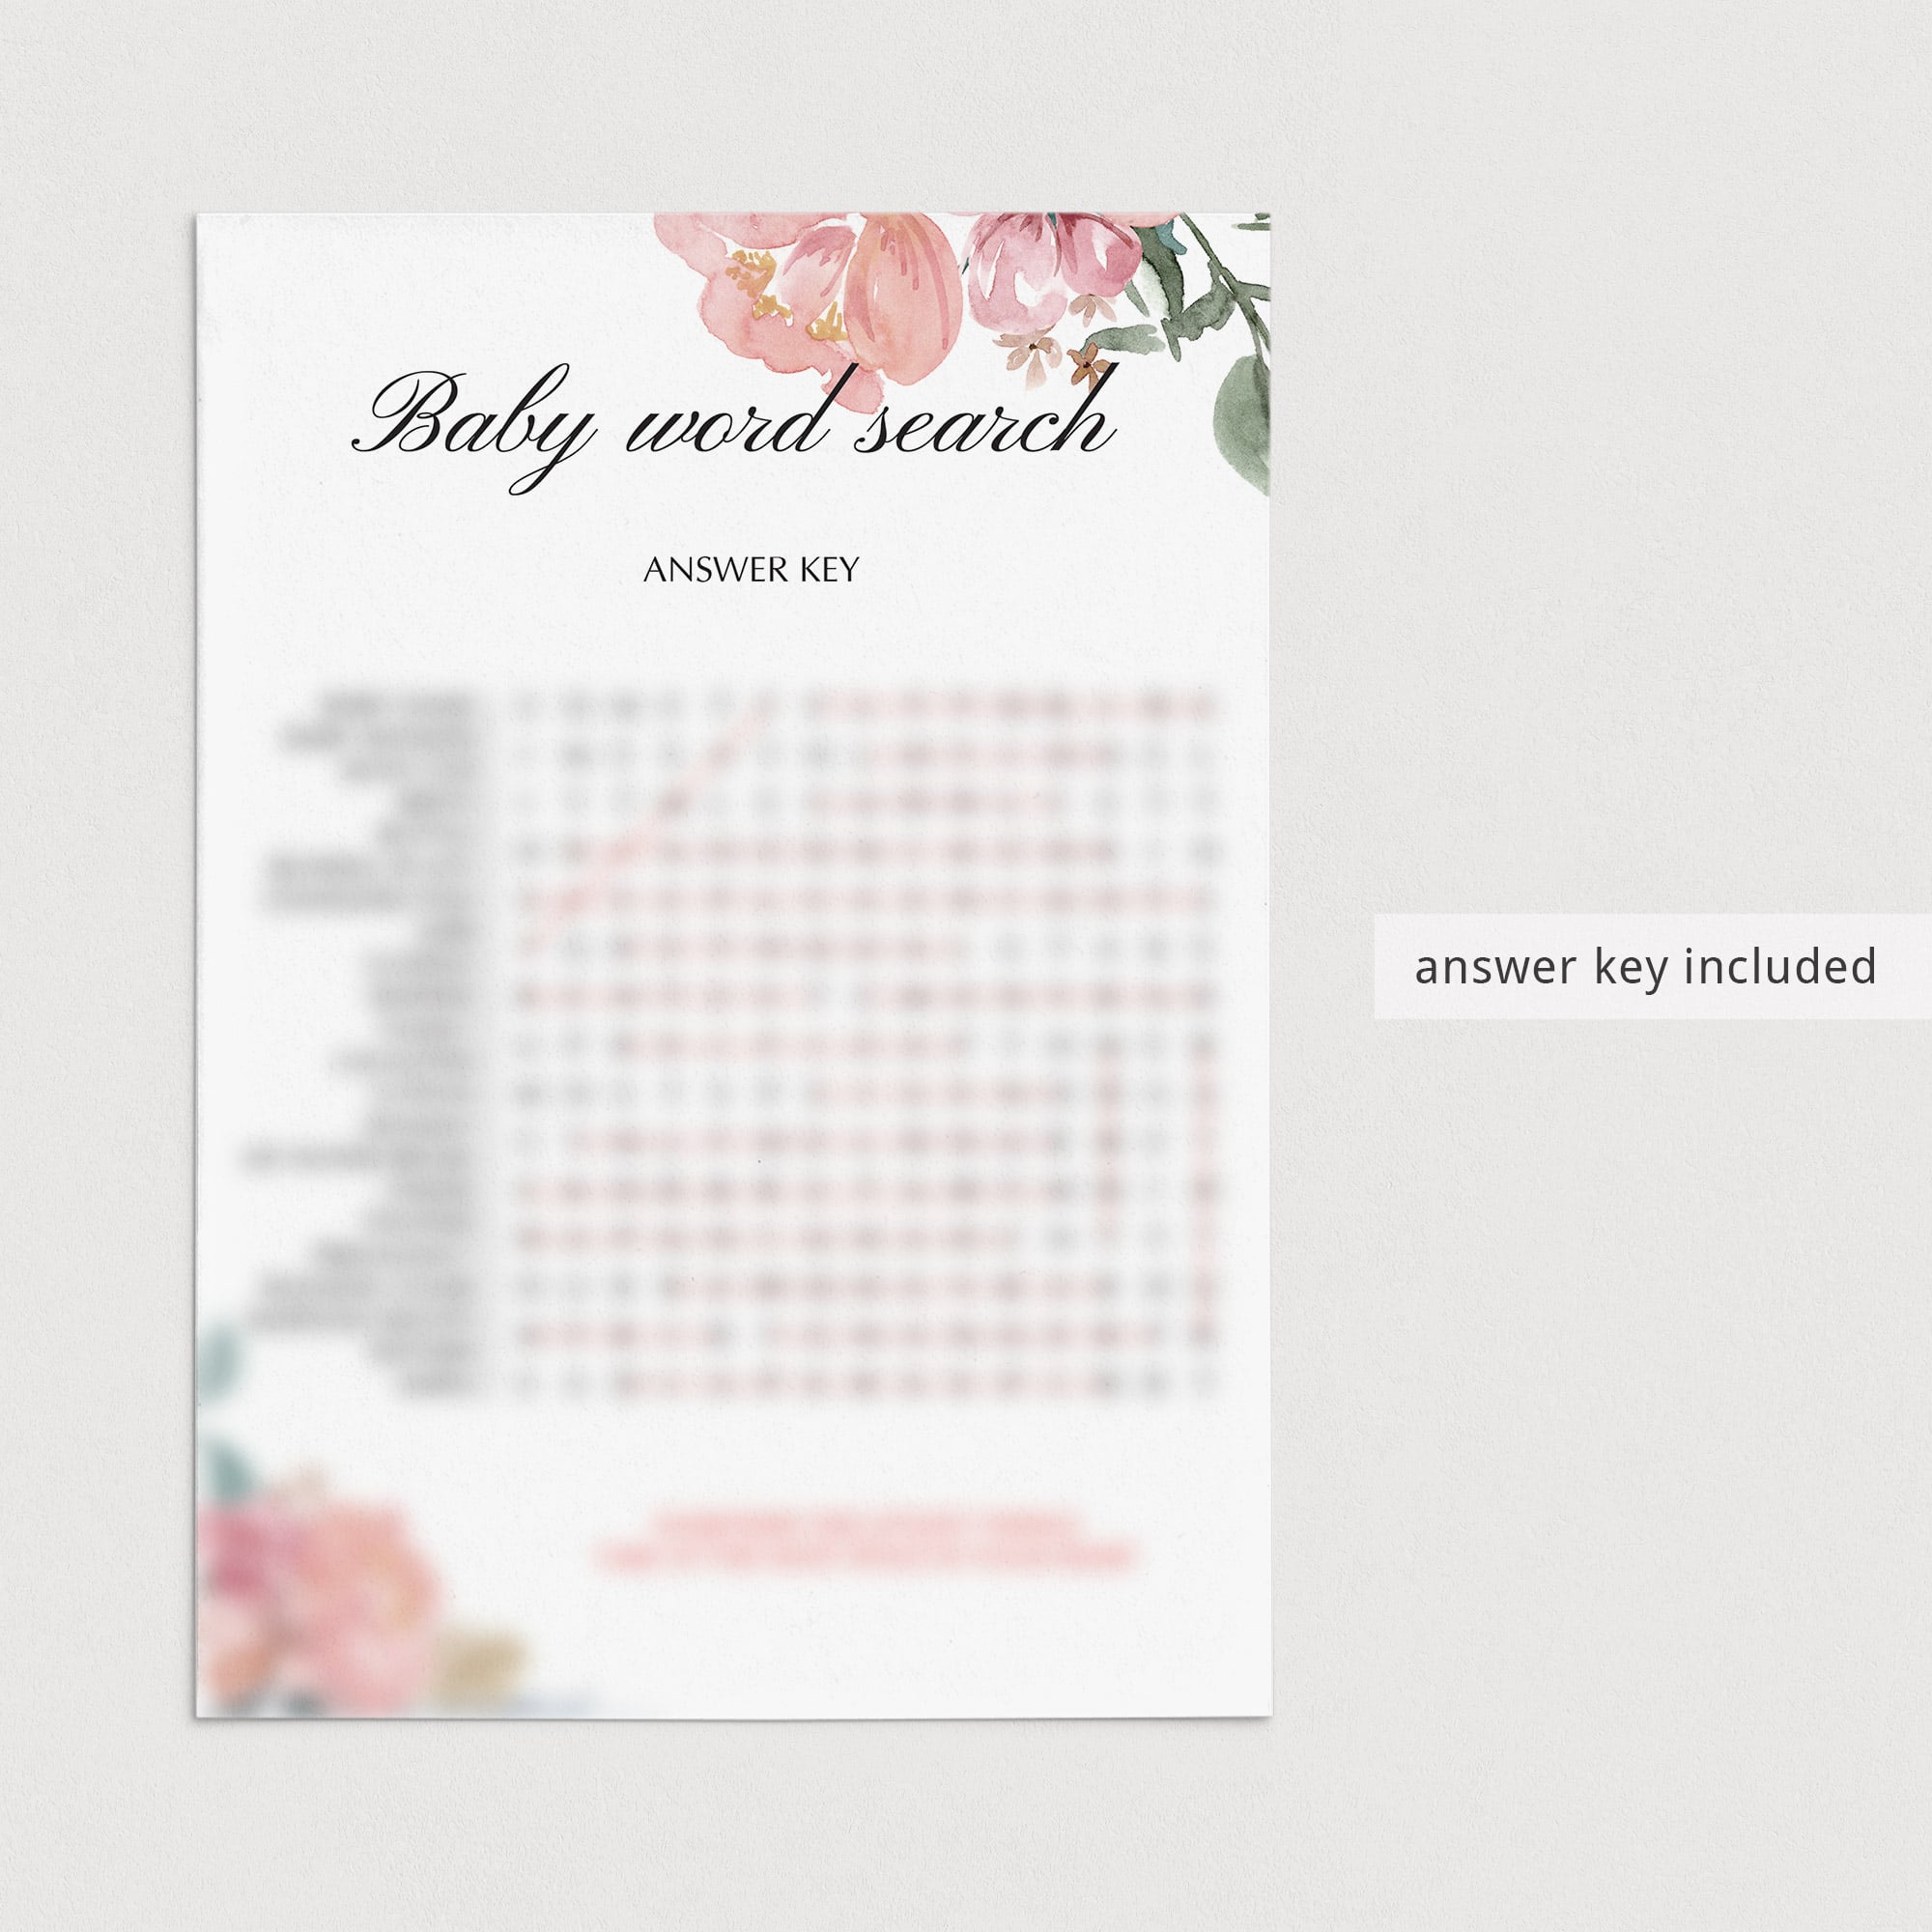 Baby word search game answers download by LittleSizzle